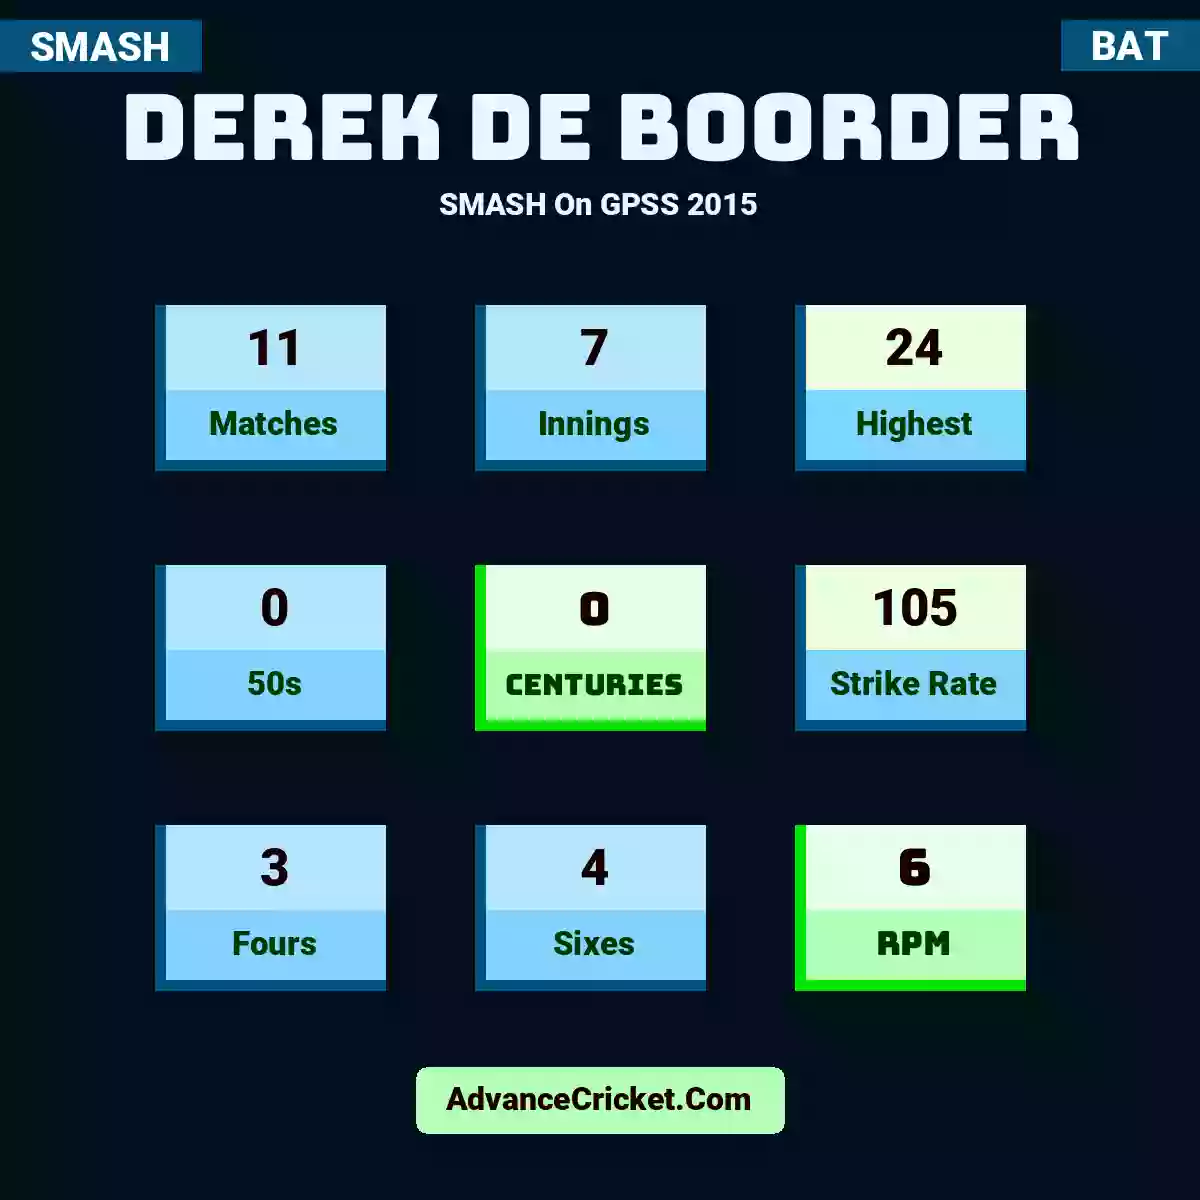 Derek de Boorder SMASH  On GPSS 2015, Derek de Boorder played 11 matches, scored 24 runs as highest, 0 half-centuries, and 0 centuries, with a strike rate of 105. D.Boorder hit 3 fours and 4 sixes, with an RPM of 6.